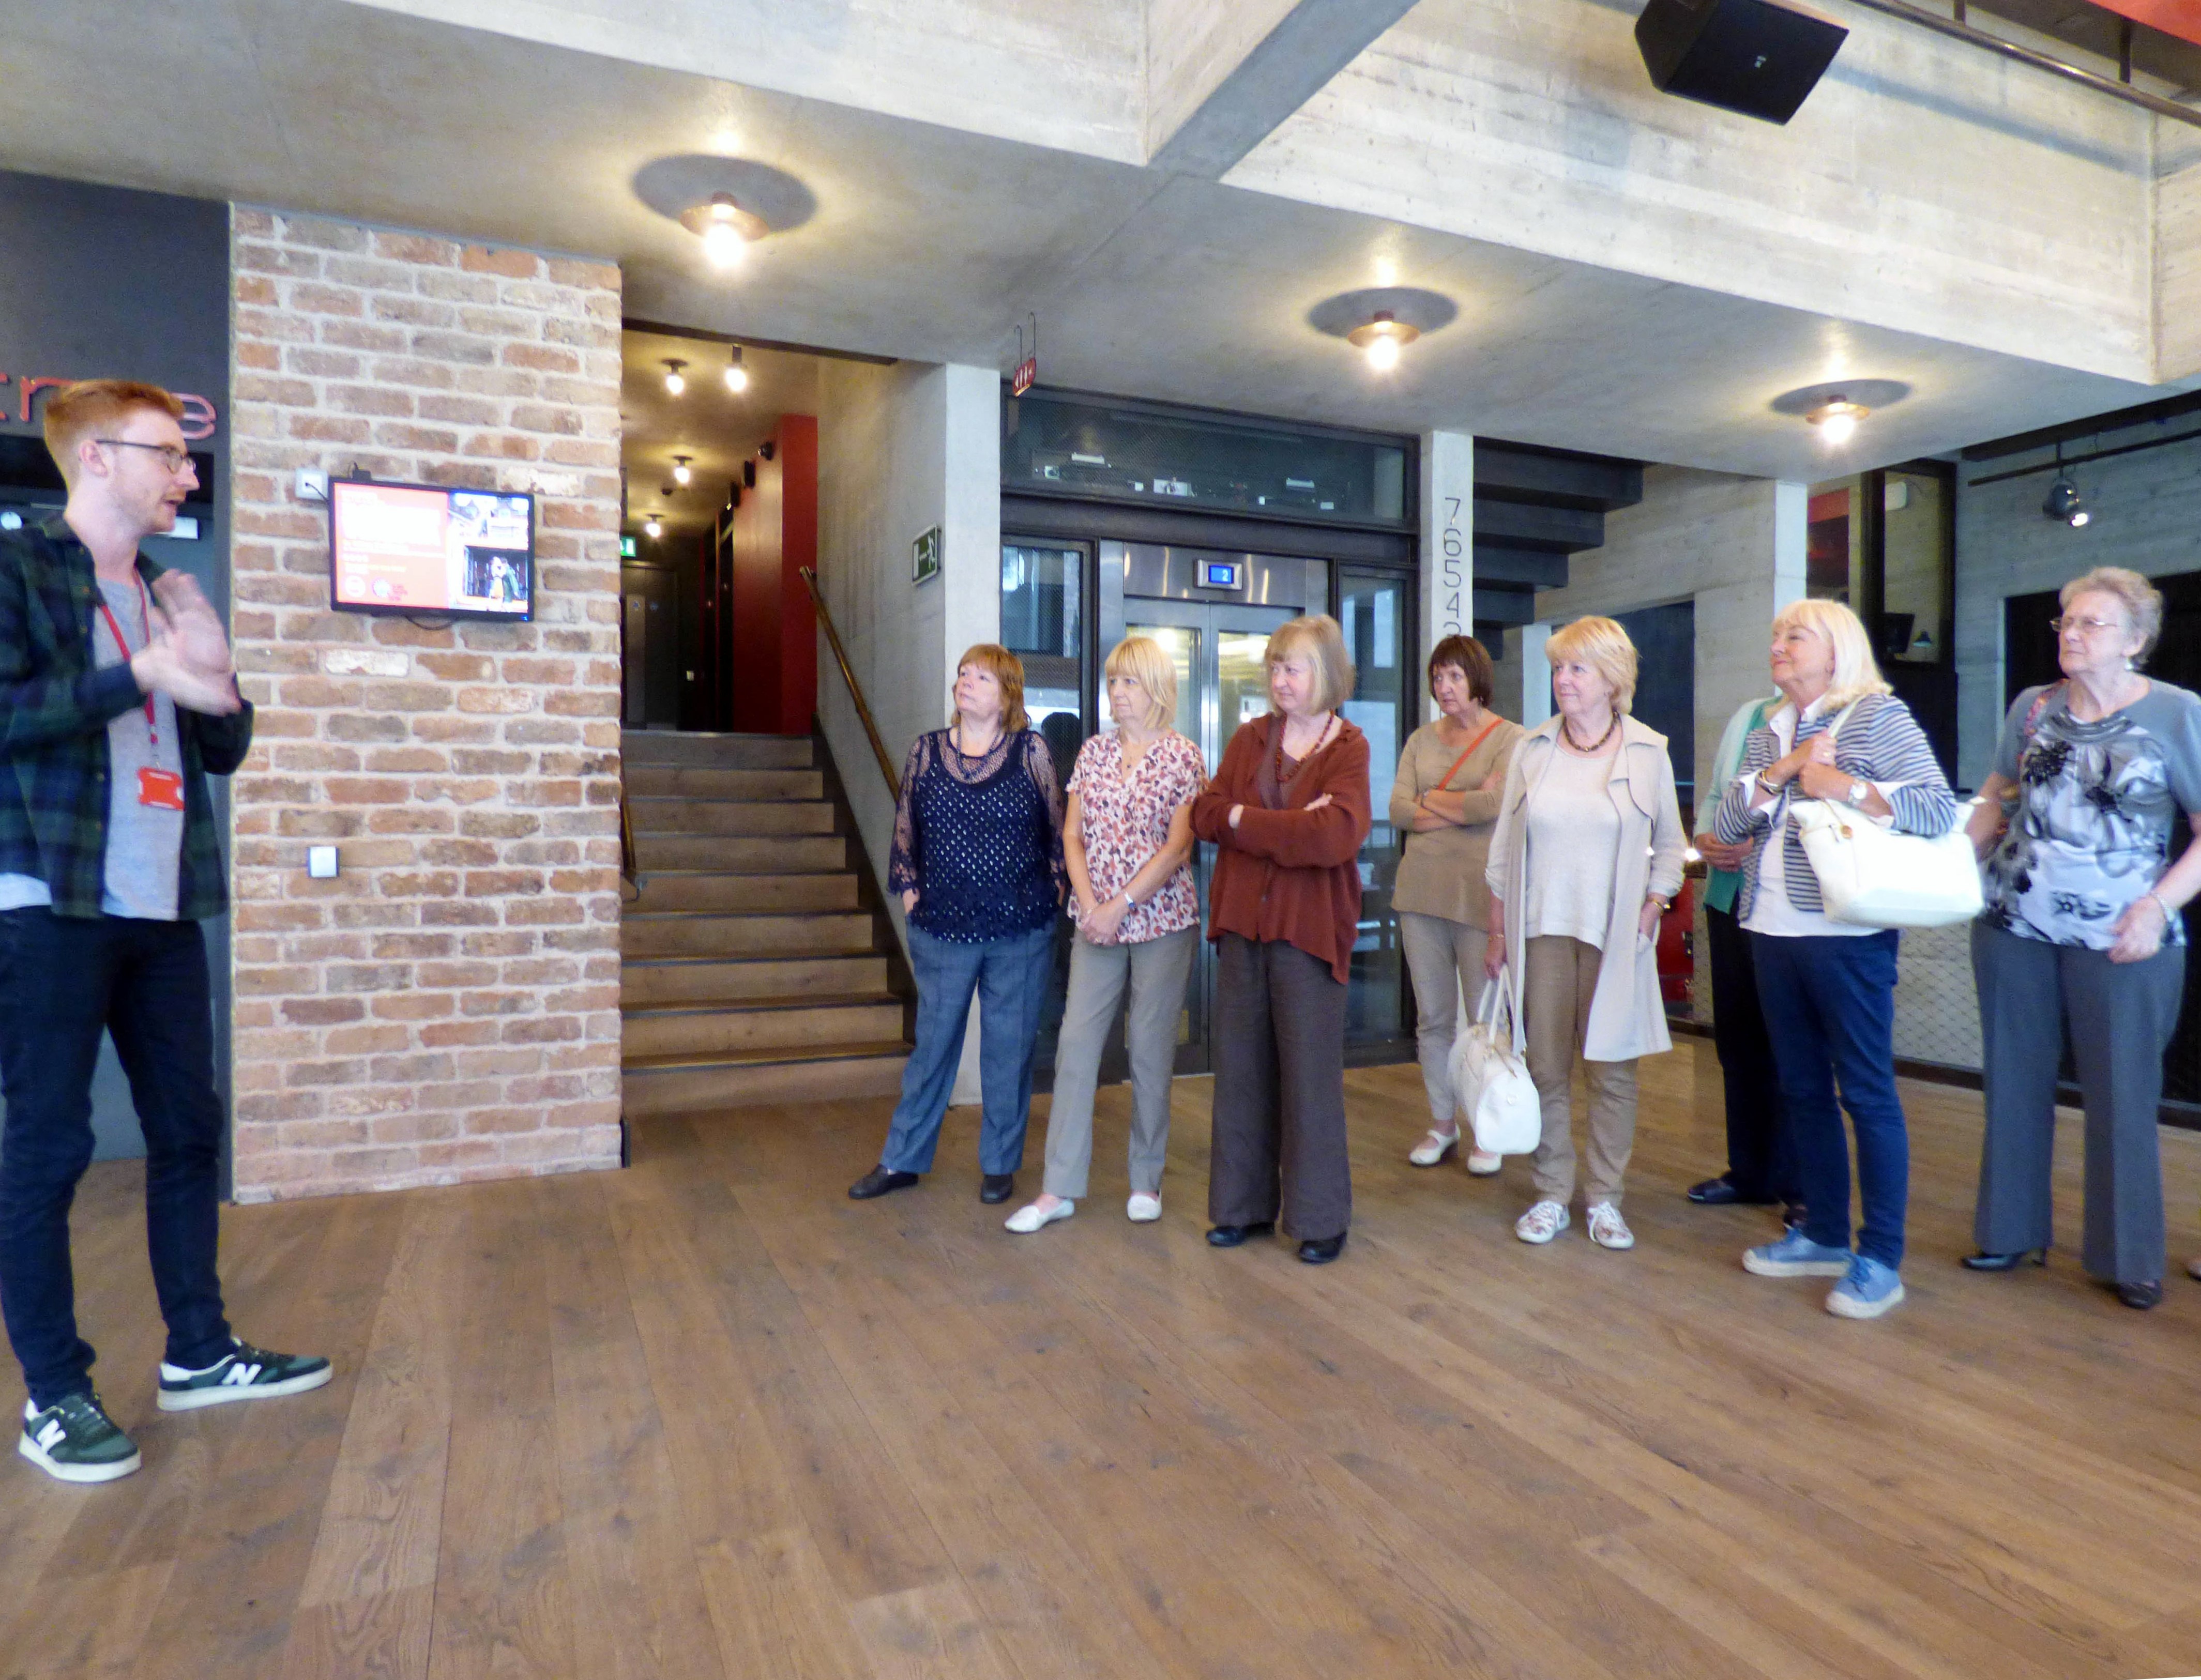 This is Brian our guide on our backstage tour of Everyman Theatre, Liverpool, July 2016